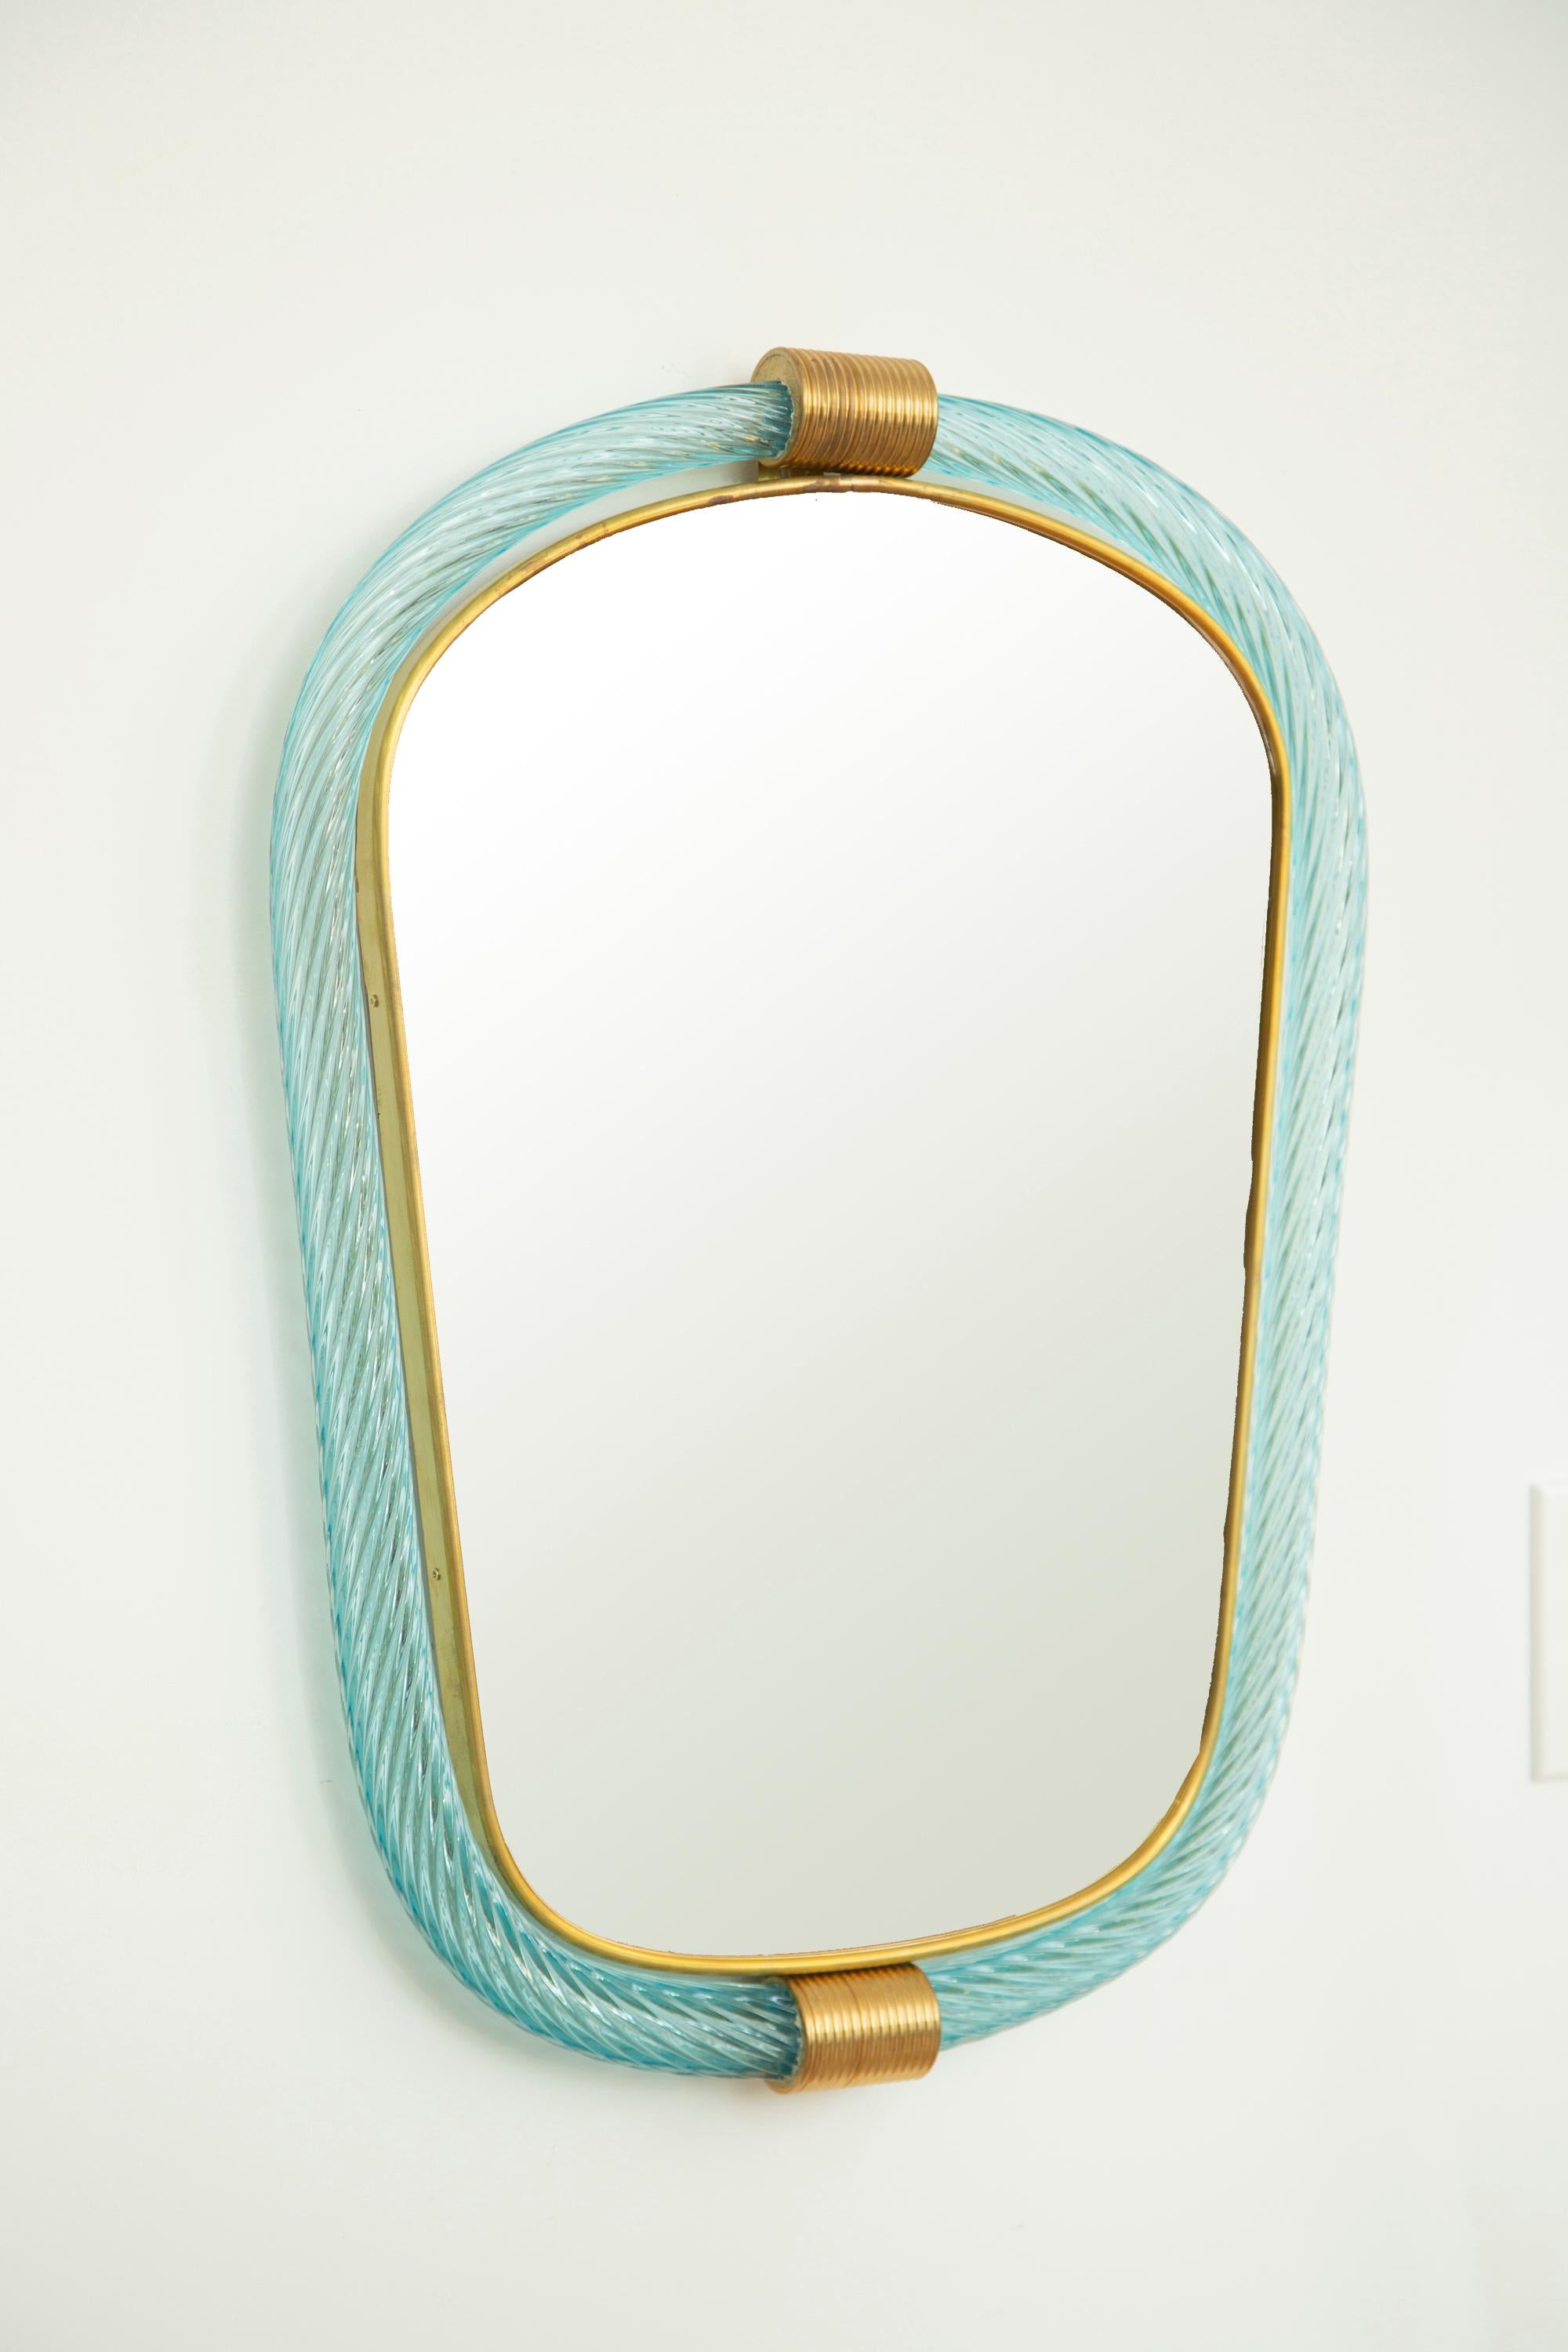 Light blue twisted rope Murano glass mirror, in stock
Two brass accents and a thin inner brass gallery
Measure: 11